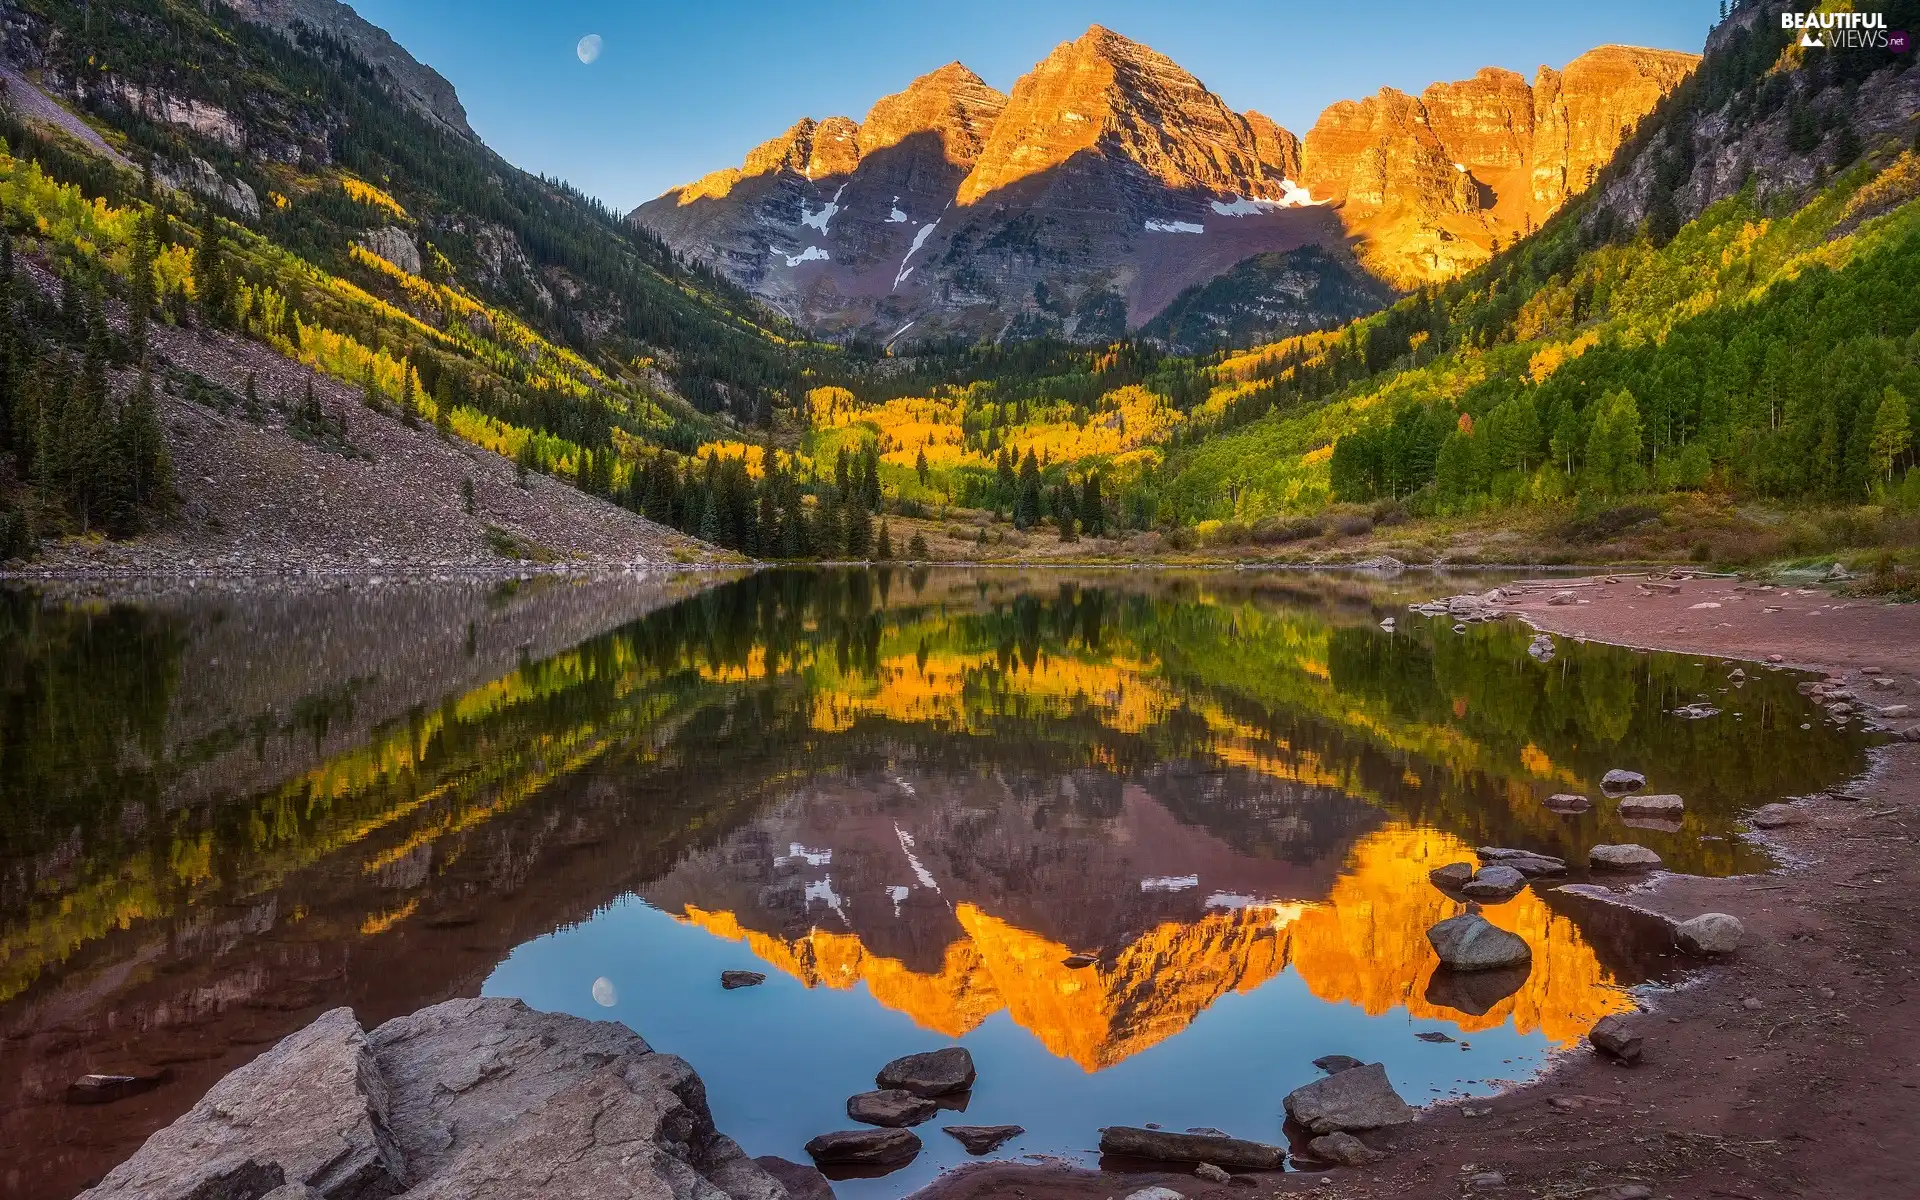 Maroon Lake, trees, The United States, viewes, State of Colorado, Maroon Bells Peaks, rocky mountains, moon